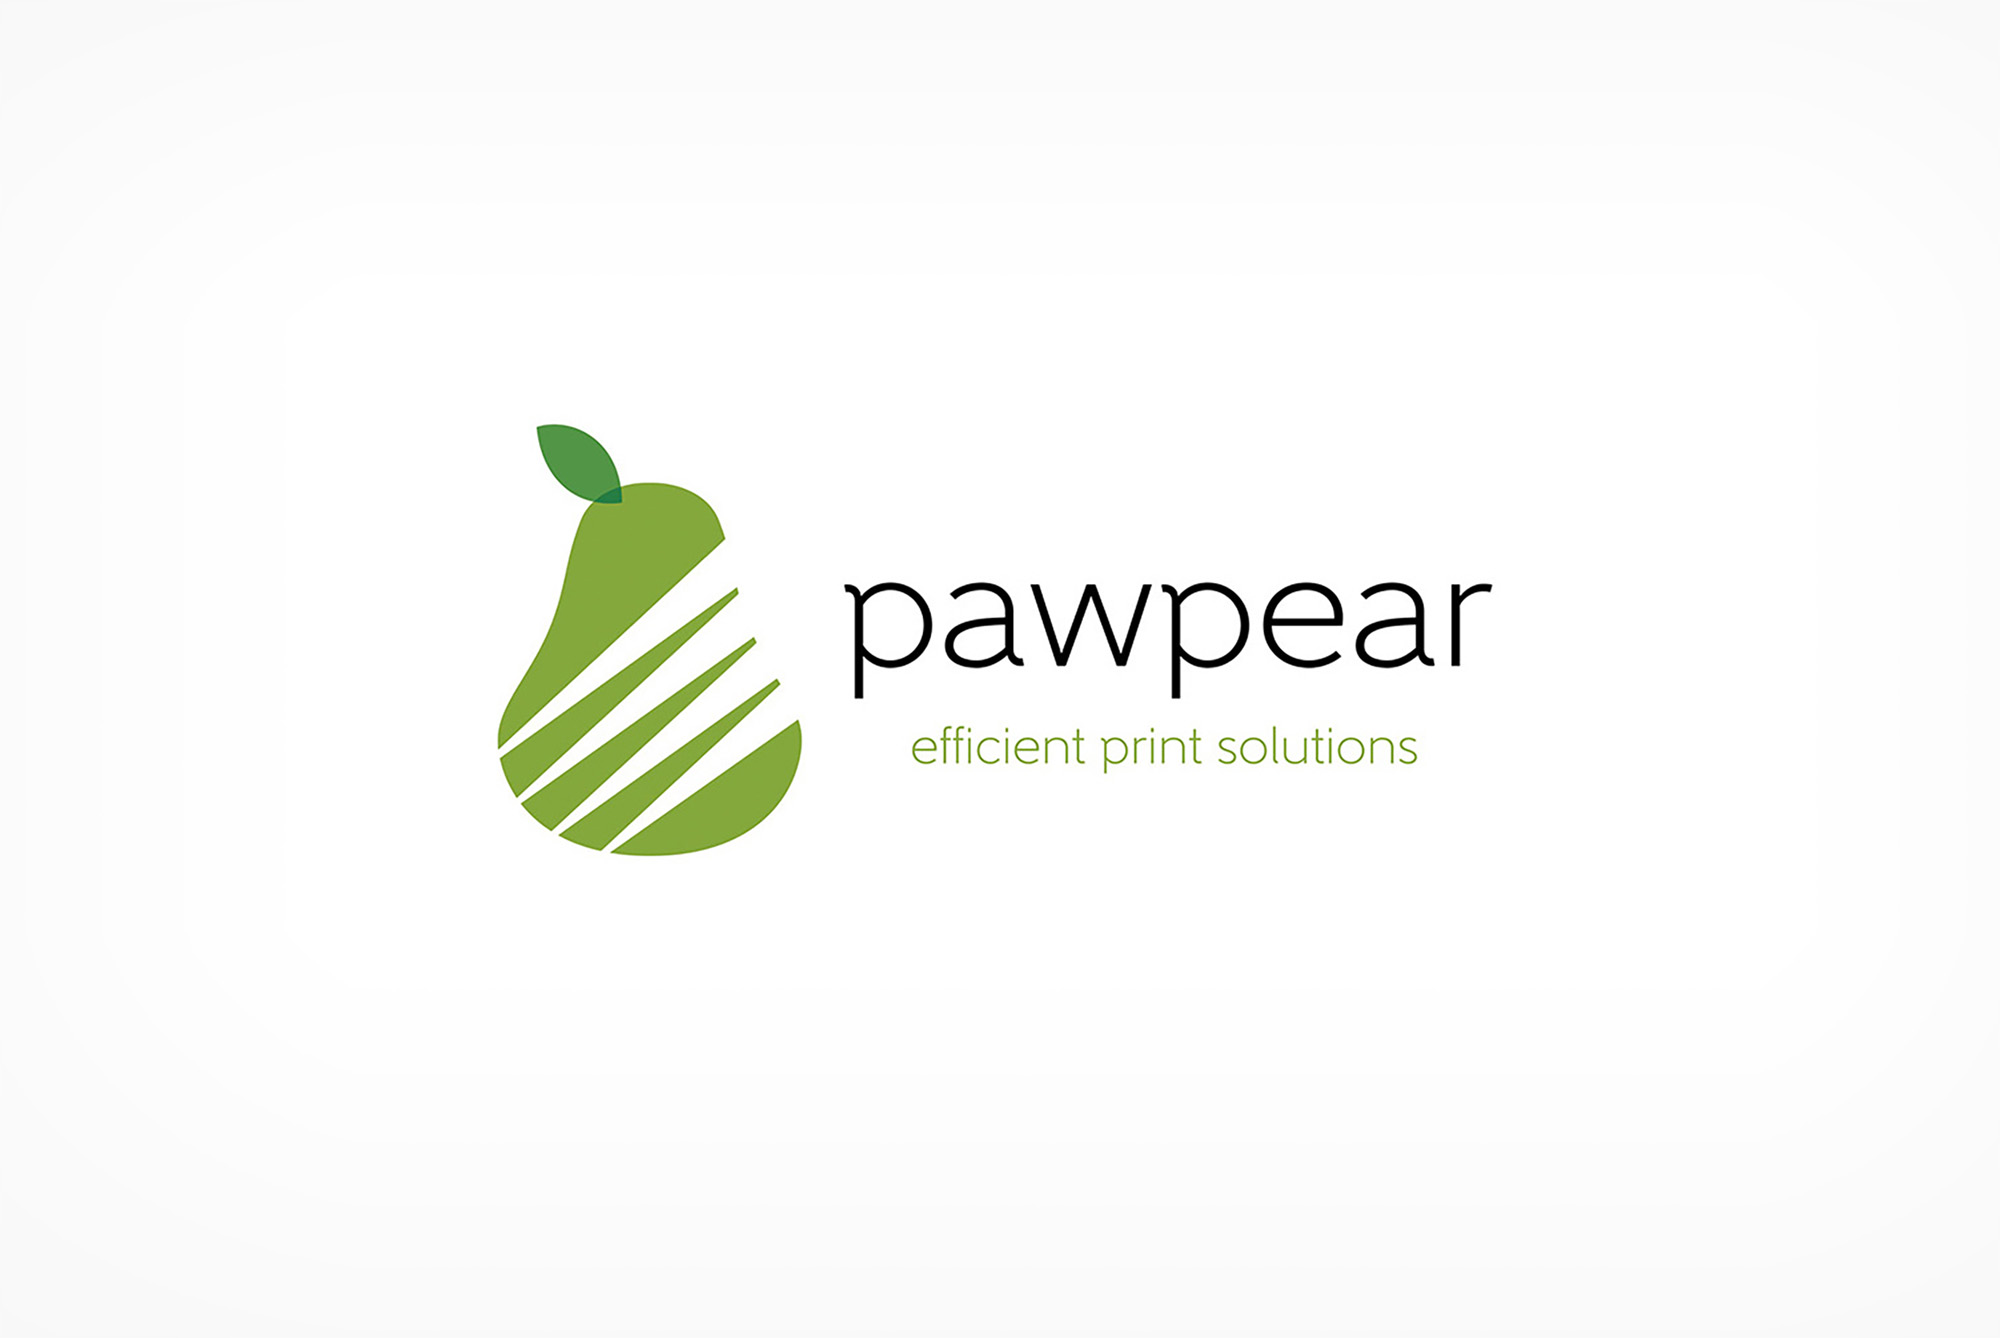 Pawpear | Efficient Print solutions brand logo with claw marks represnting four colour process printing.